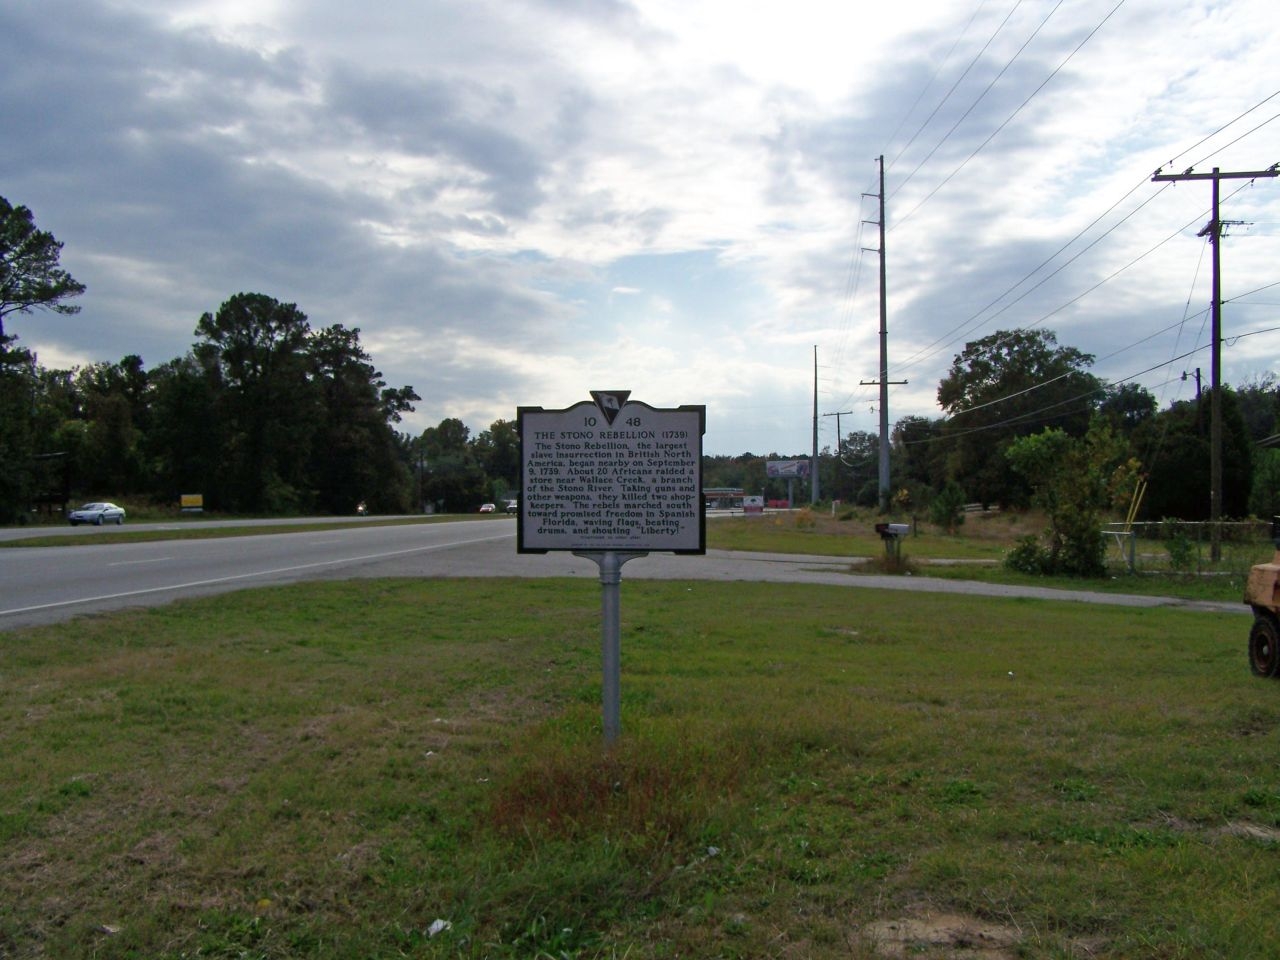 The Stono Rebellion Marker, looking south on US 17